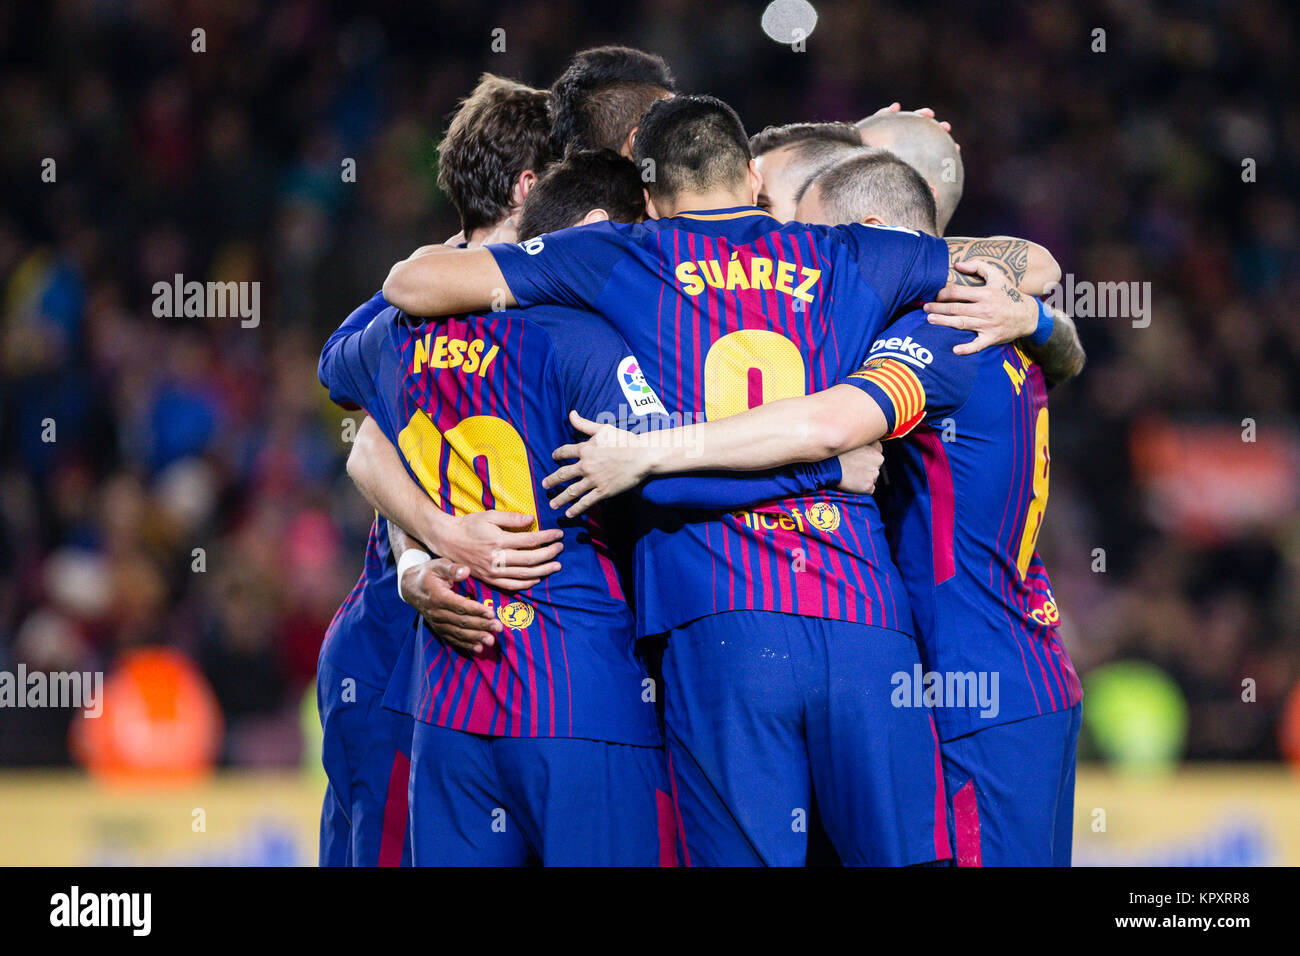 Barcelona, Spain. 17th Dec, 2017. SPAIN - 17th of December: Barcelona forward Luis Suarez (9) with his teammates of FC Barcelona celebrates after scoring the goal during the match between FC Barcelona against Deportivo Coruna, for the round 16 of the Liga Santander, played at Camp Nou Stadium on 17th December 2017 in Barcelona, Spain. (Credit: GTO/Urbanandsport/Gtres Online) Credit: Gtres Información más Comuniación on line, S.L./Alamy Live News Stock Photo